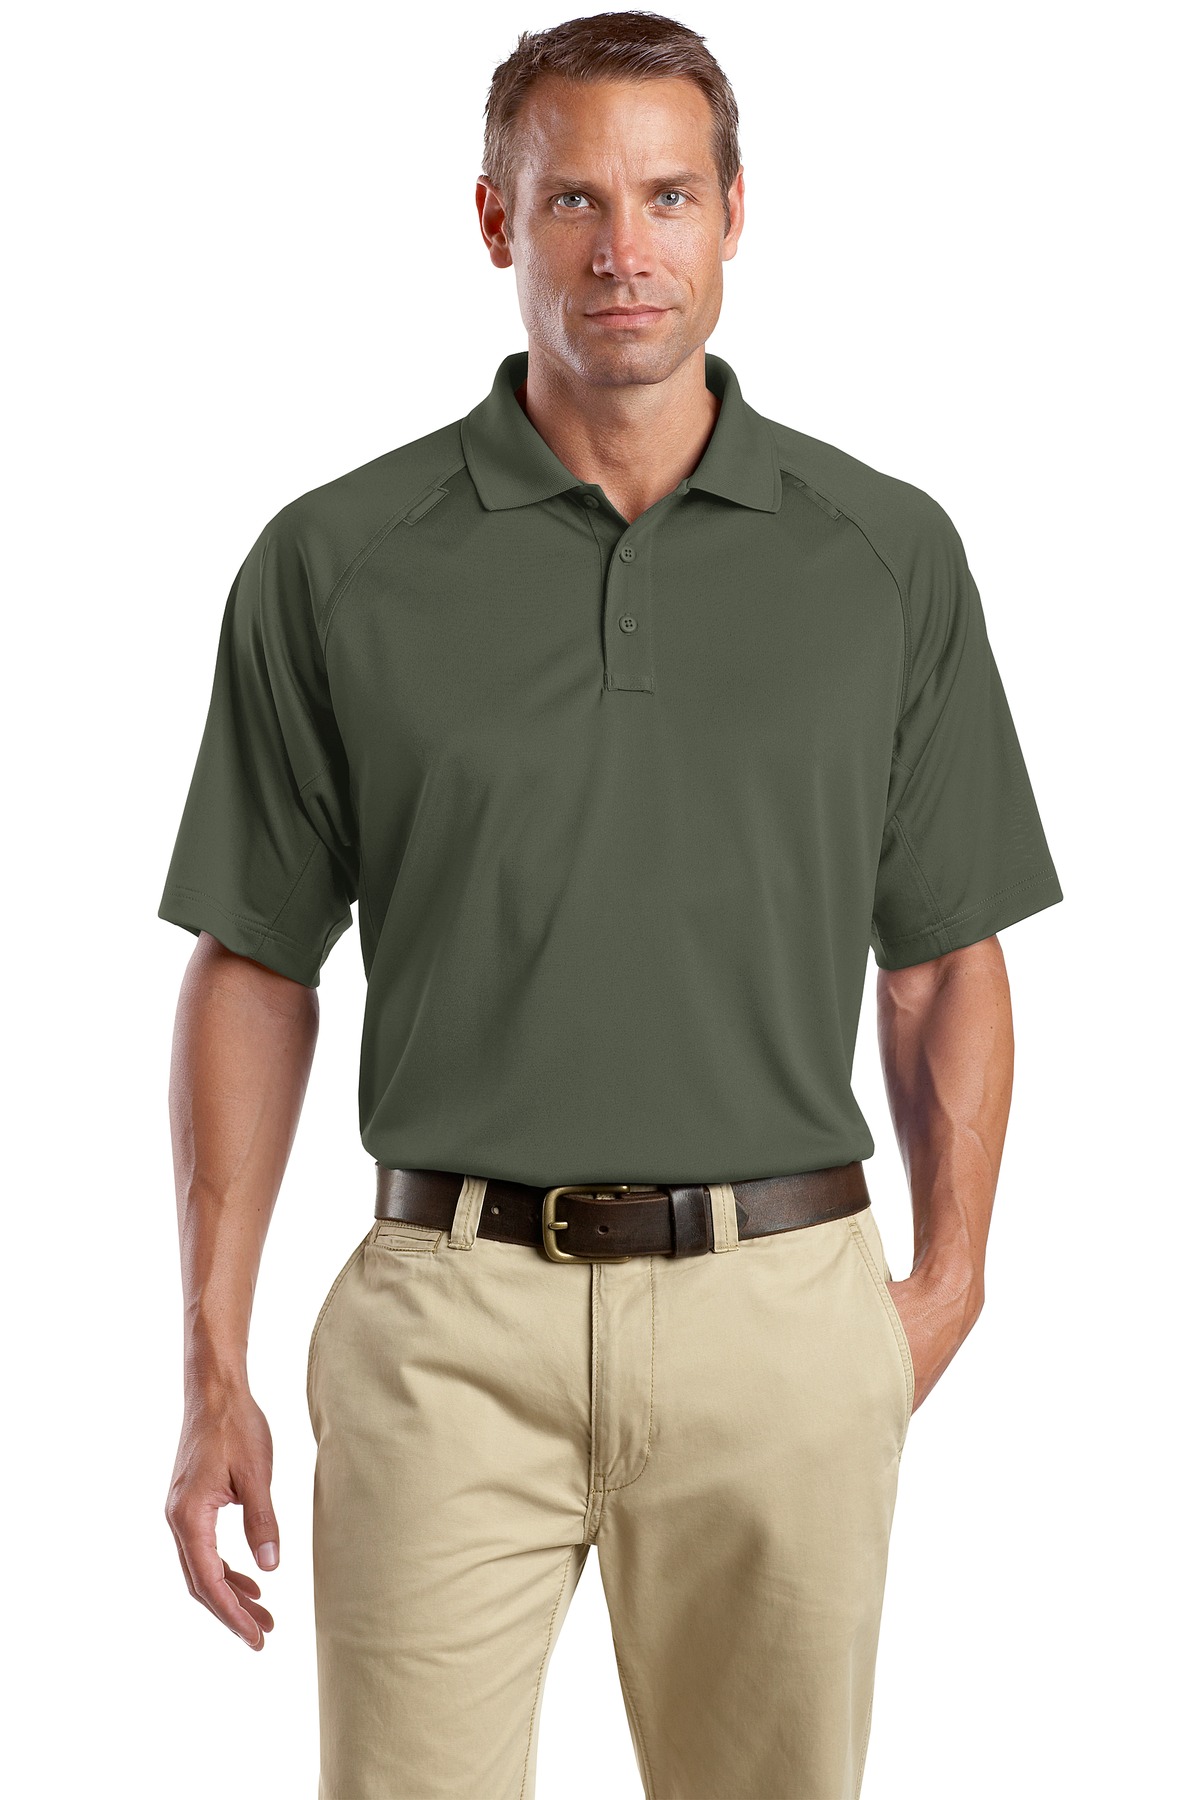 CornerStone# CS410, S/S Select Snag-Proof Tactical Polo